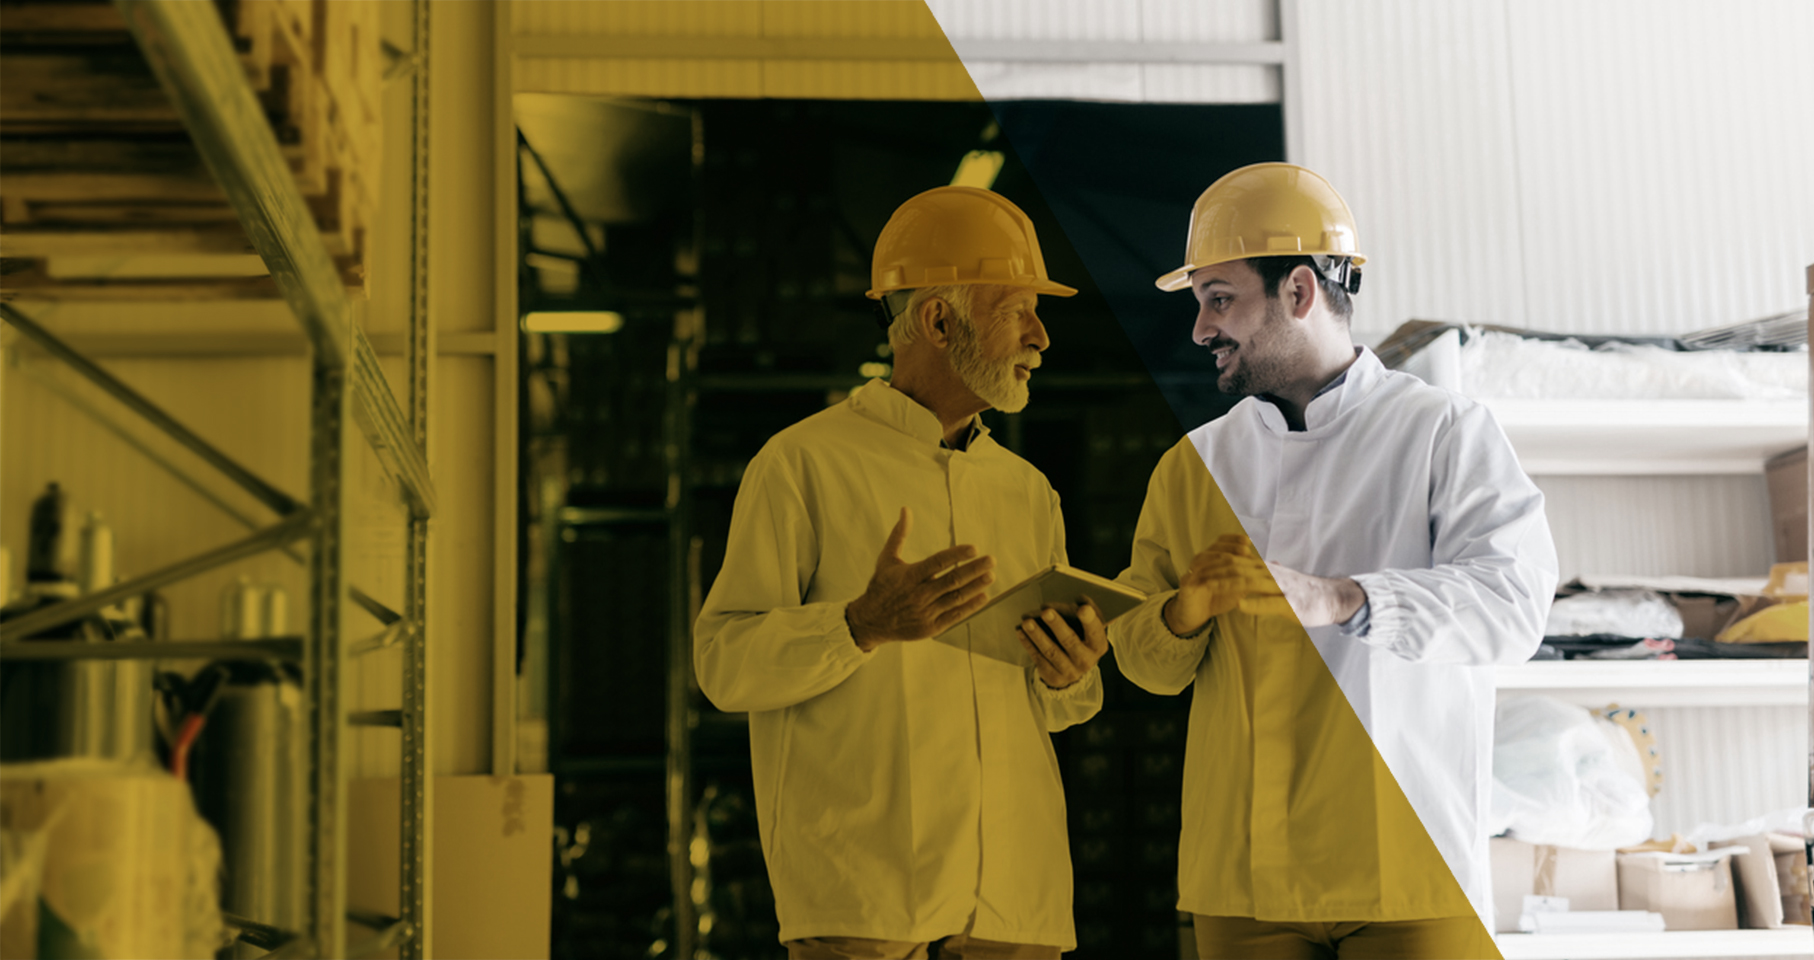 Two men weating hard hats and white coats talking in a processing plant.